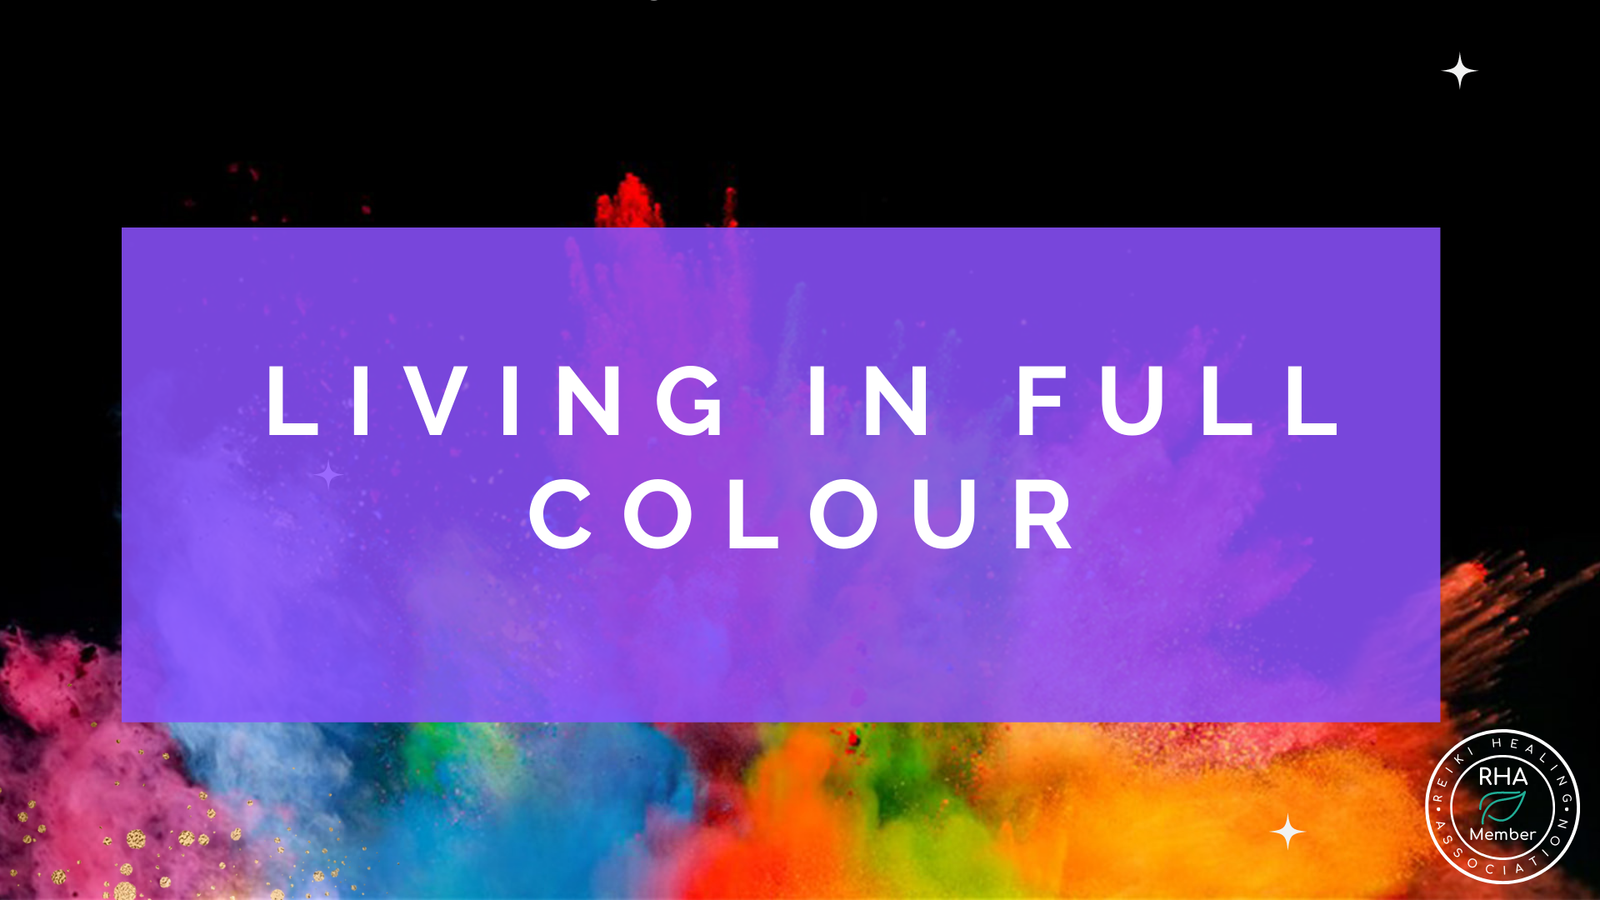 Colour Therapy: Living in Full Colour